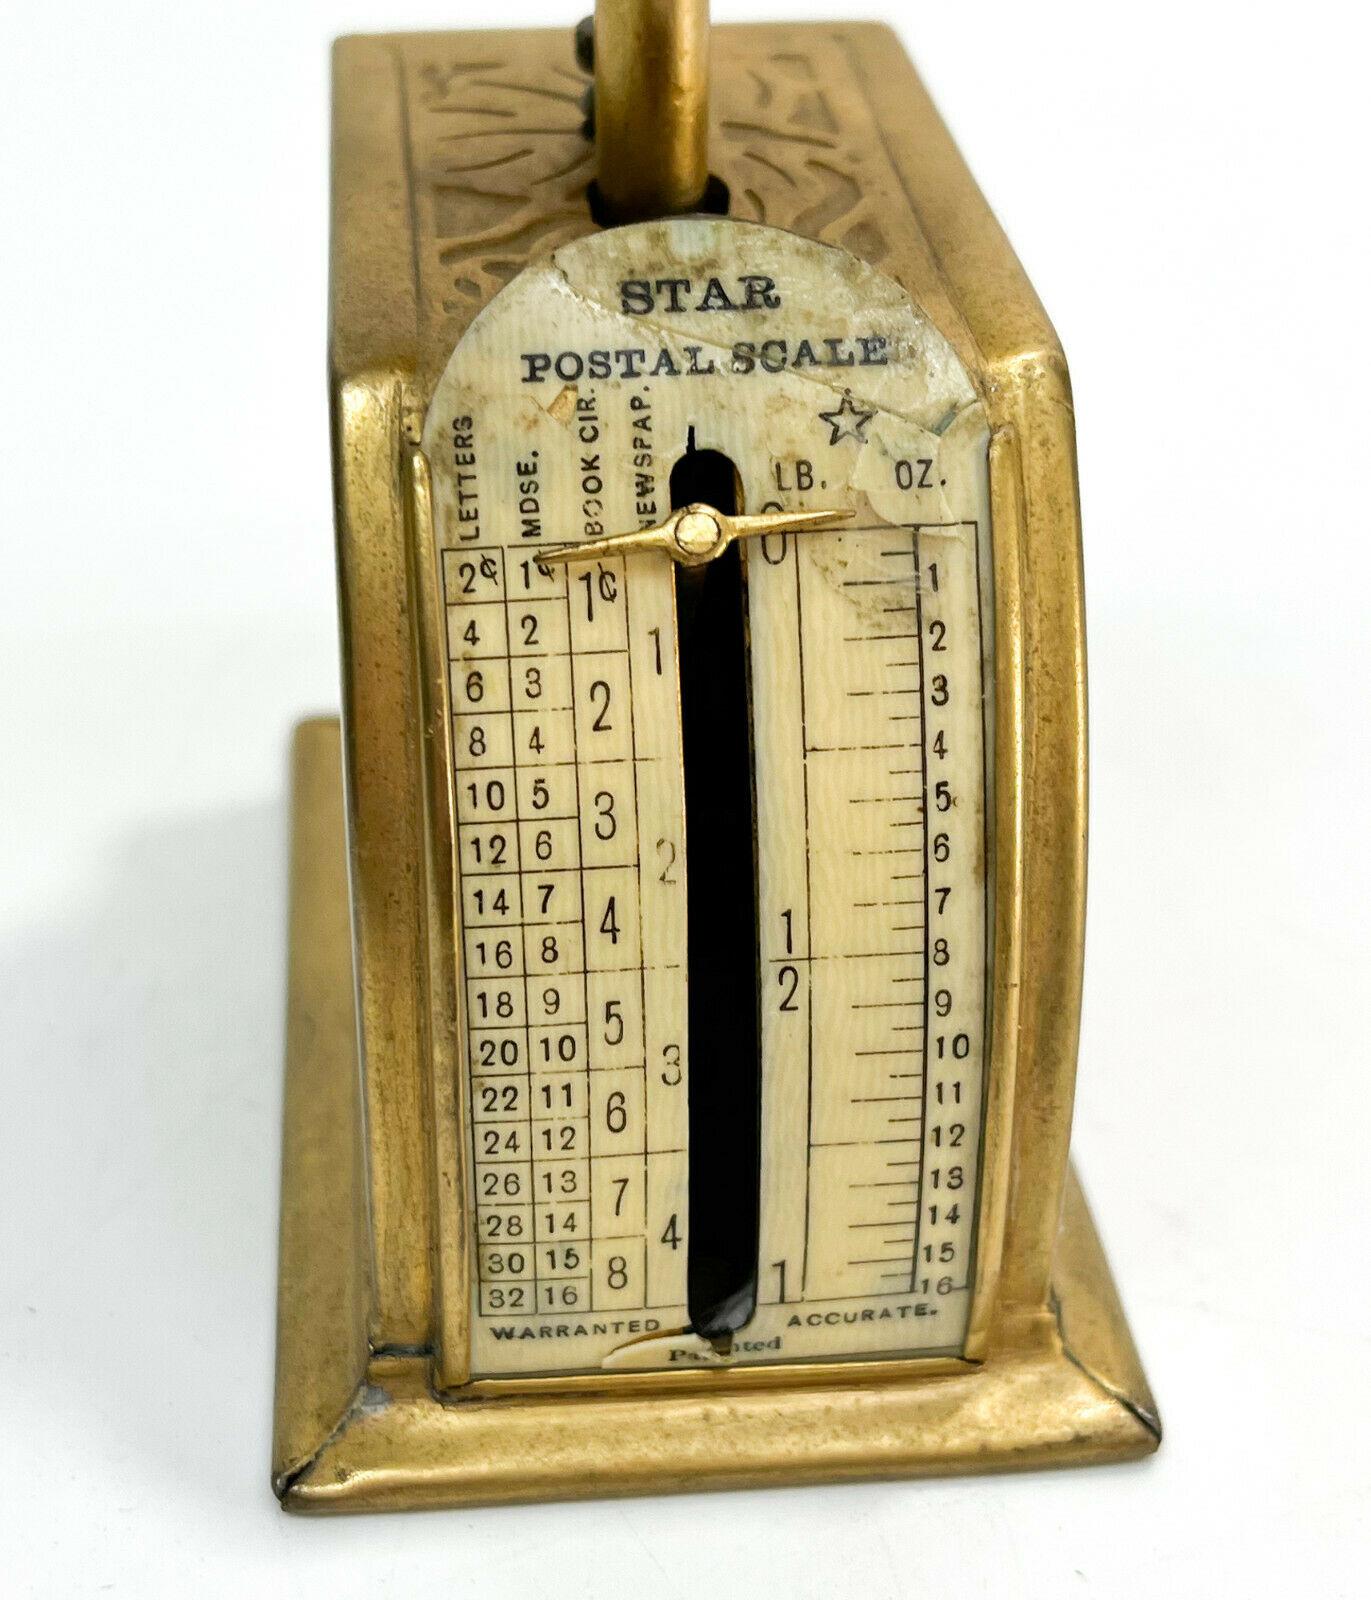 Tiffany Studios New York gilt bronze postage scale in grapevine #872

Tiffany Studios mark to the underside.

Additional Information:
Dimension: 3 inches x 2 inches x 3 inches tall
Condition: Loss and restoration to the scale lable.